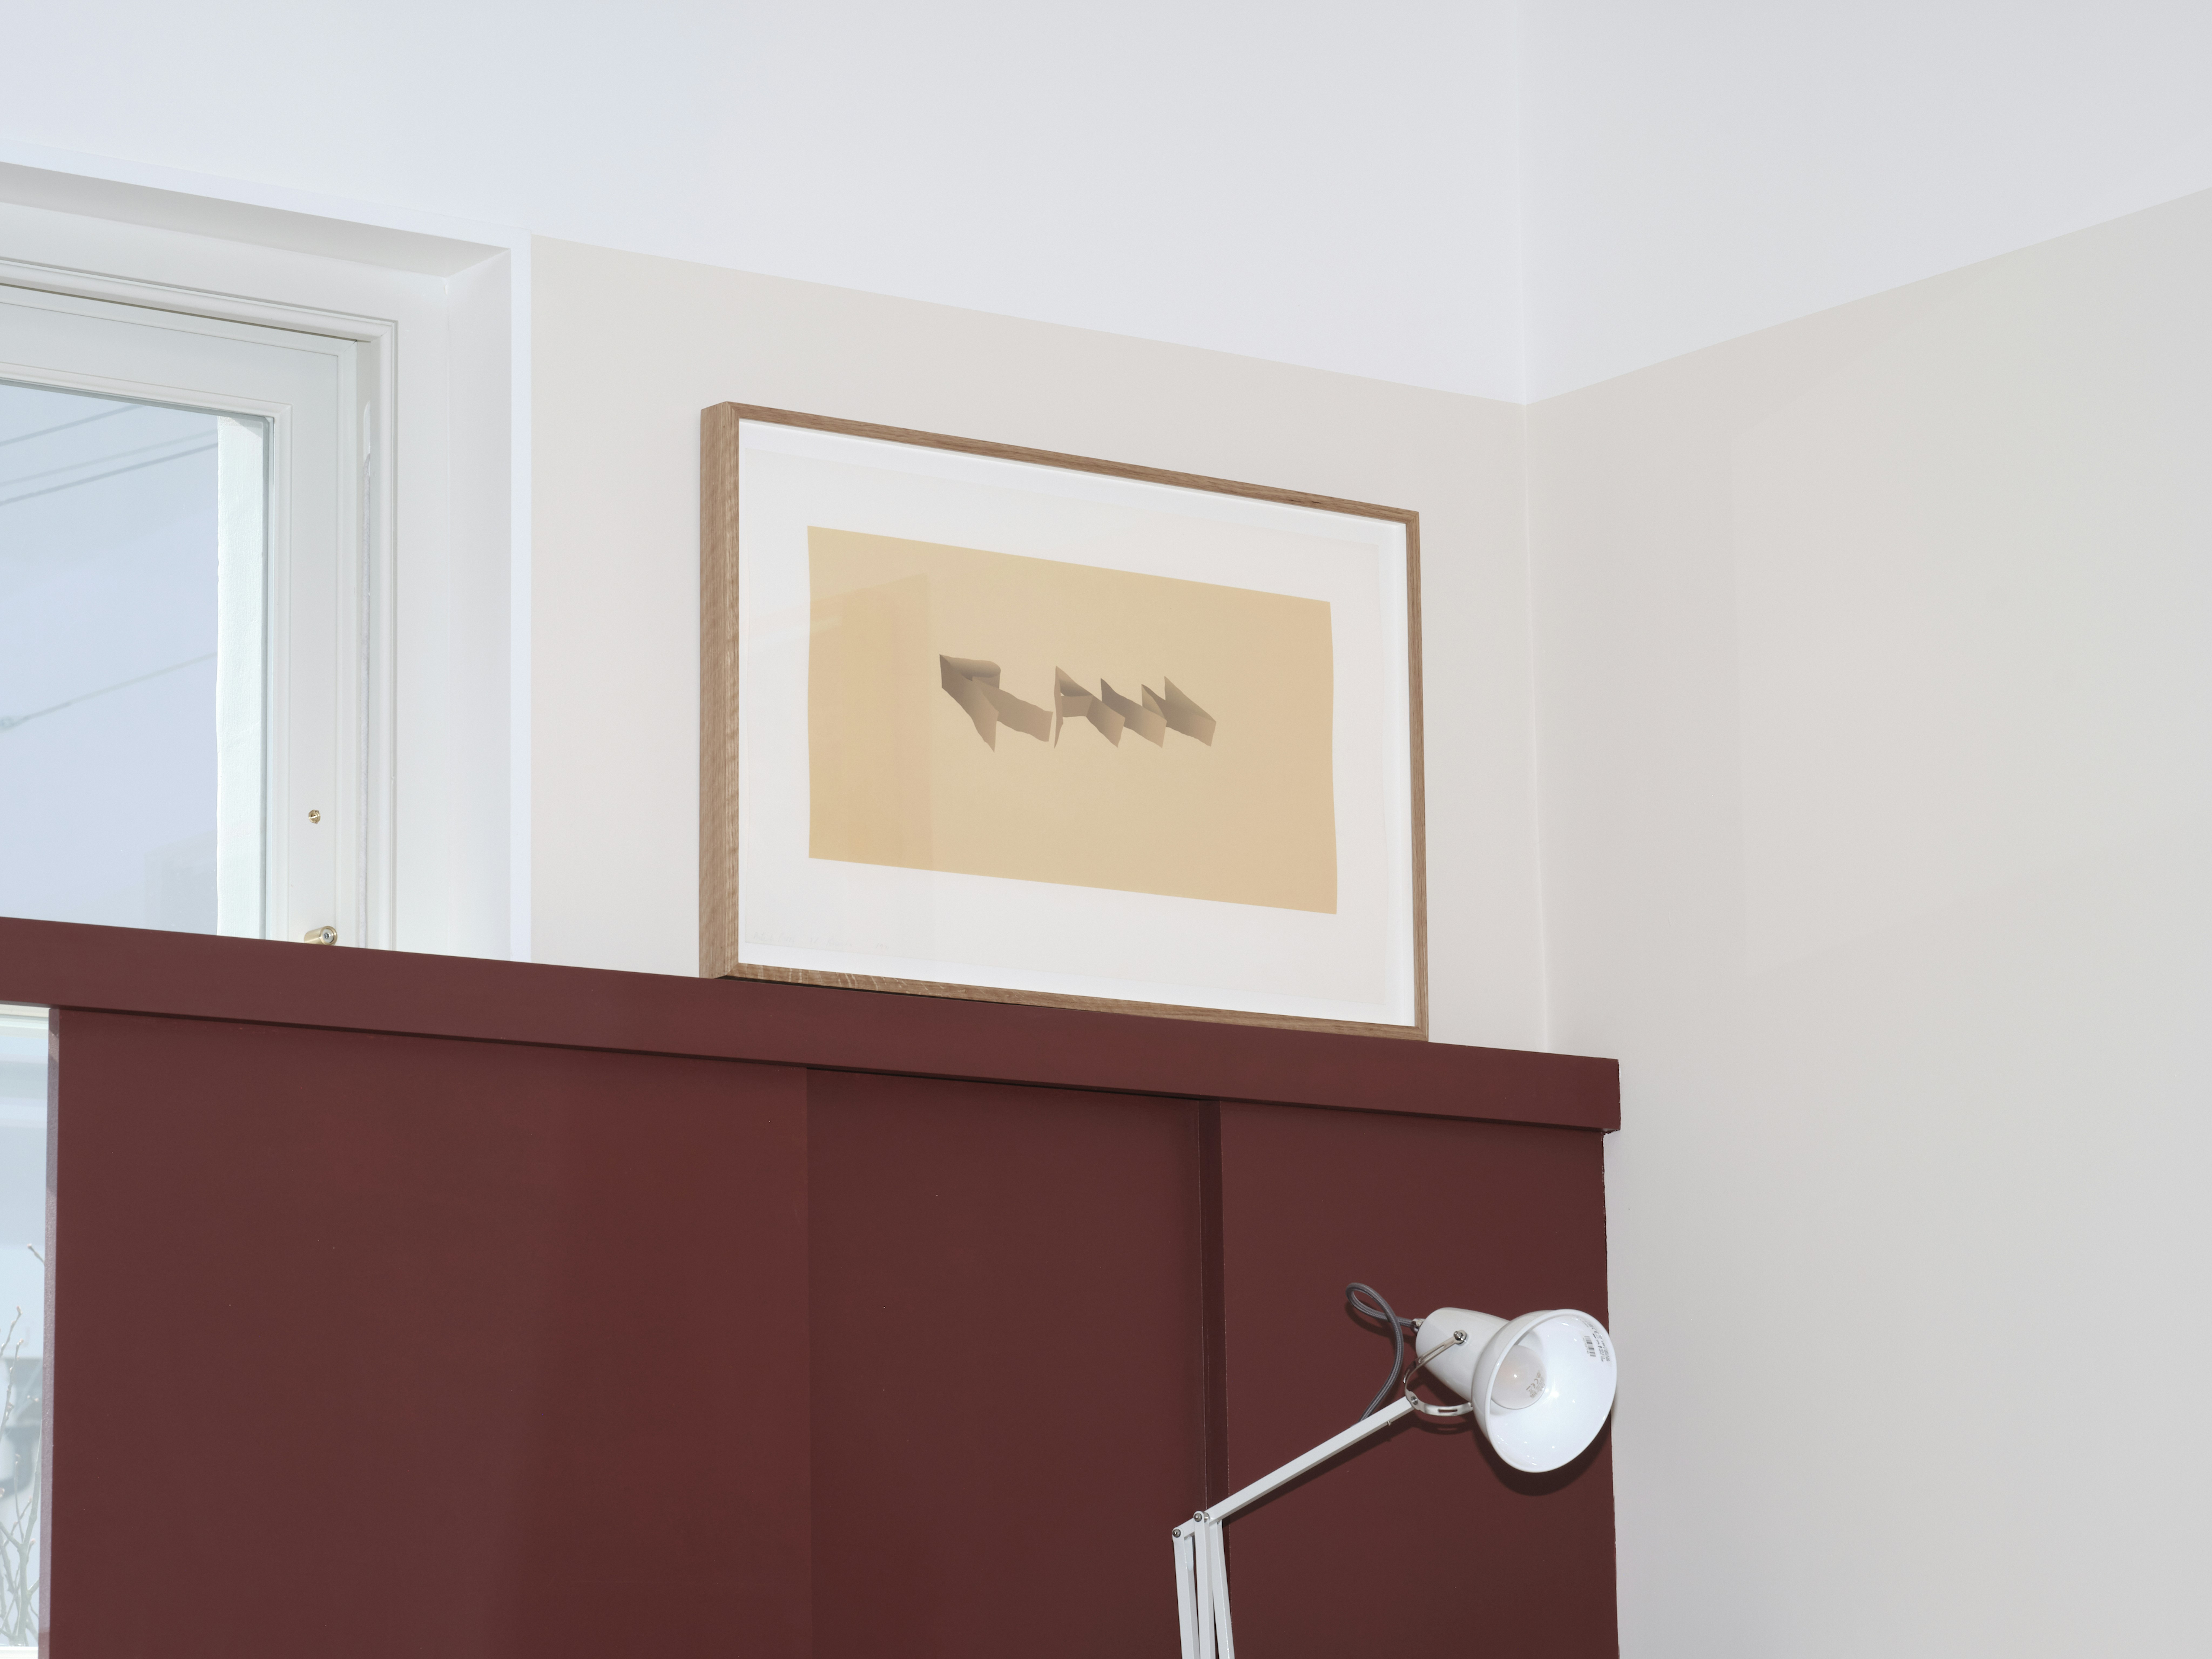 installation photograph of framed screenprint by Ed Ruscha in mustard yellow overlaid with the word raw in capital letters in perspective and slightly skewed in darker tone brown-yellow